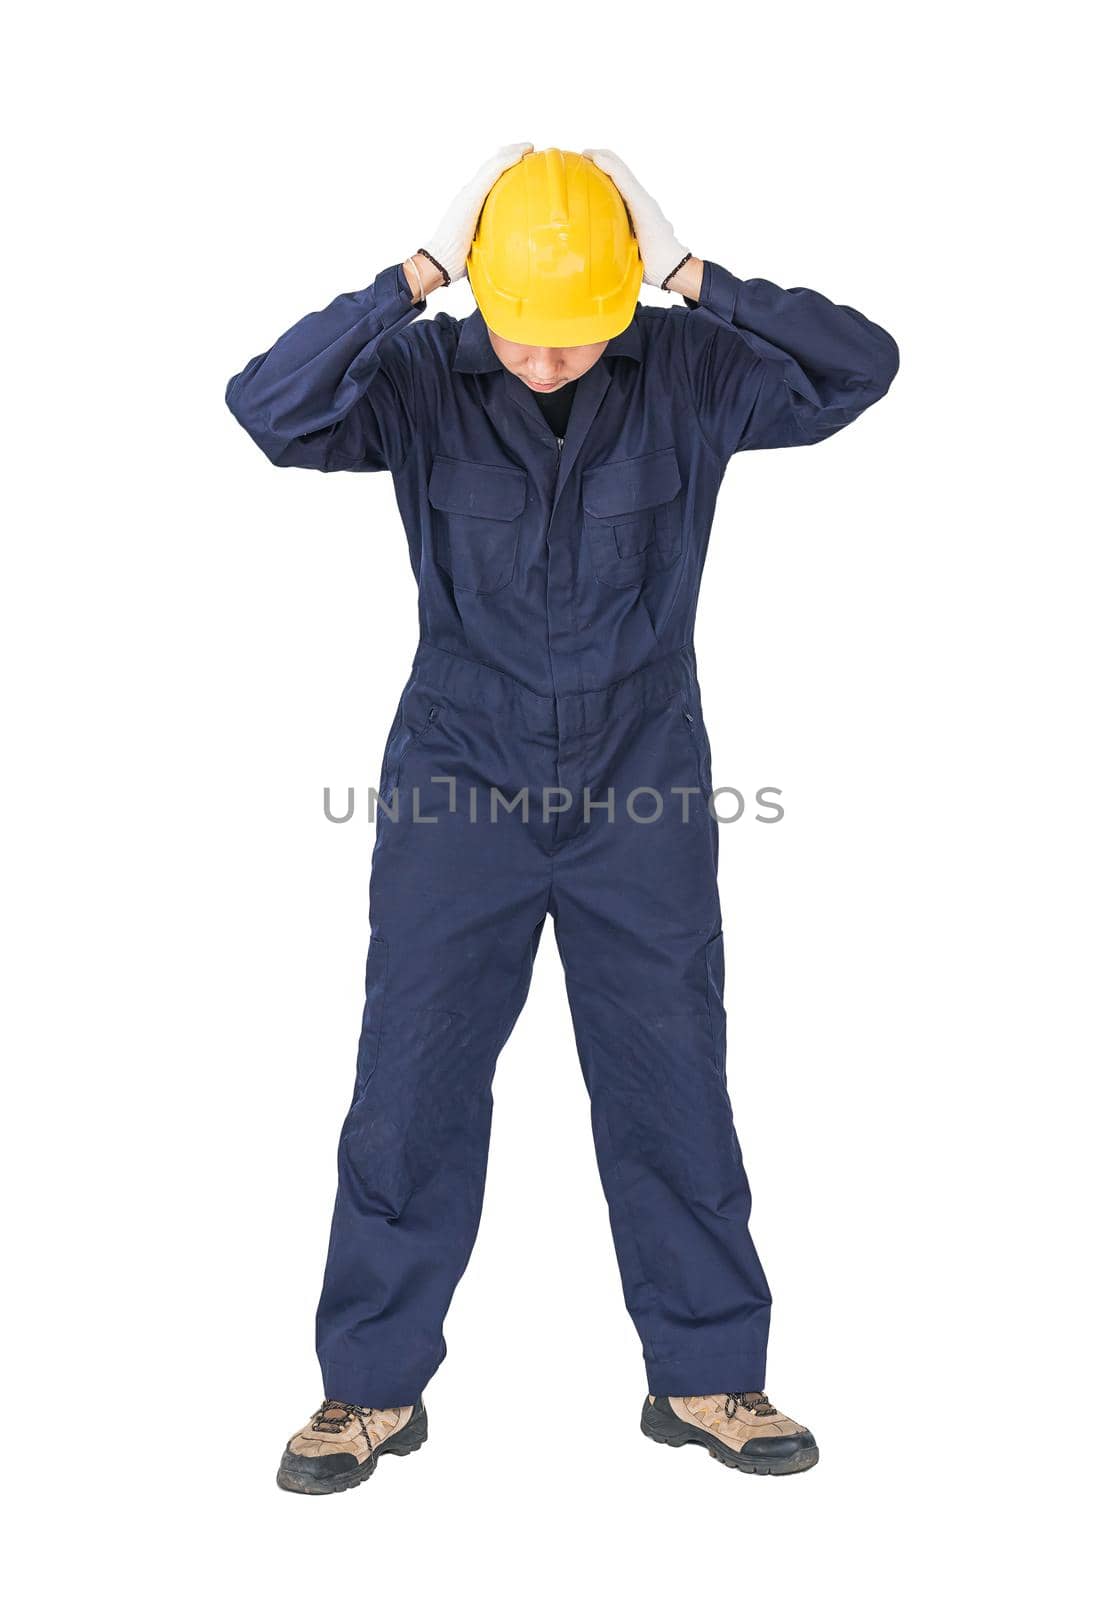 Workman with blue coveralls and hardhat in a uniform with clipping path by stoonn